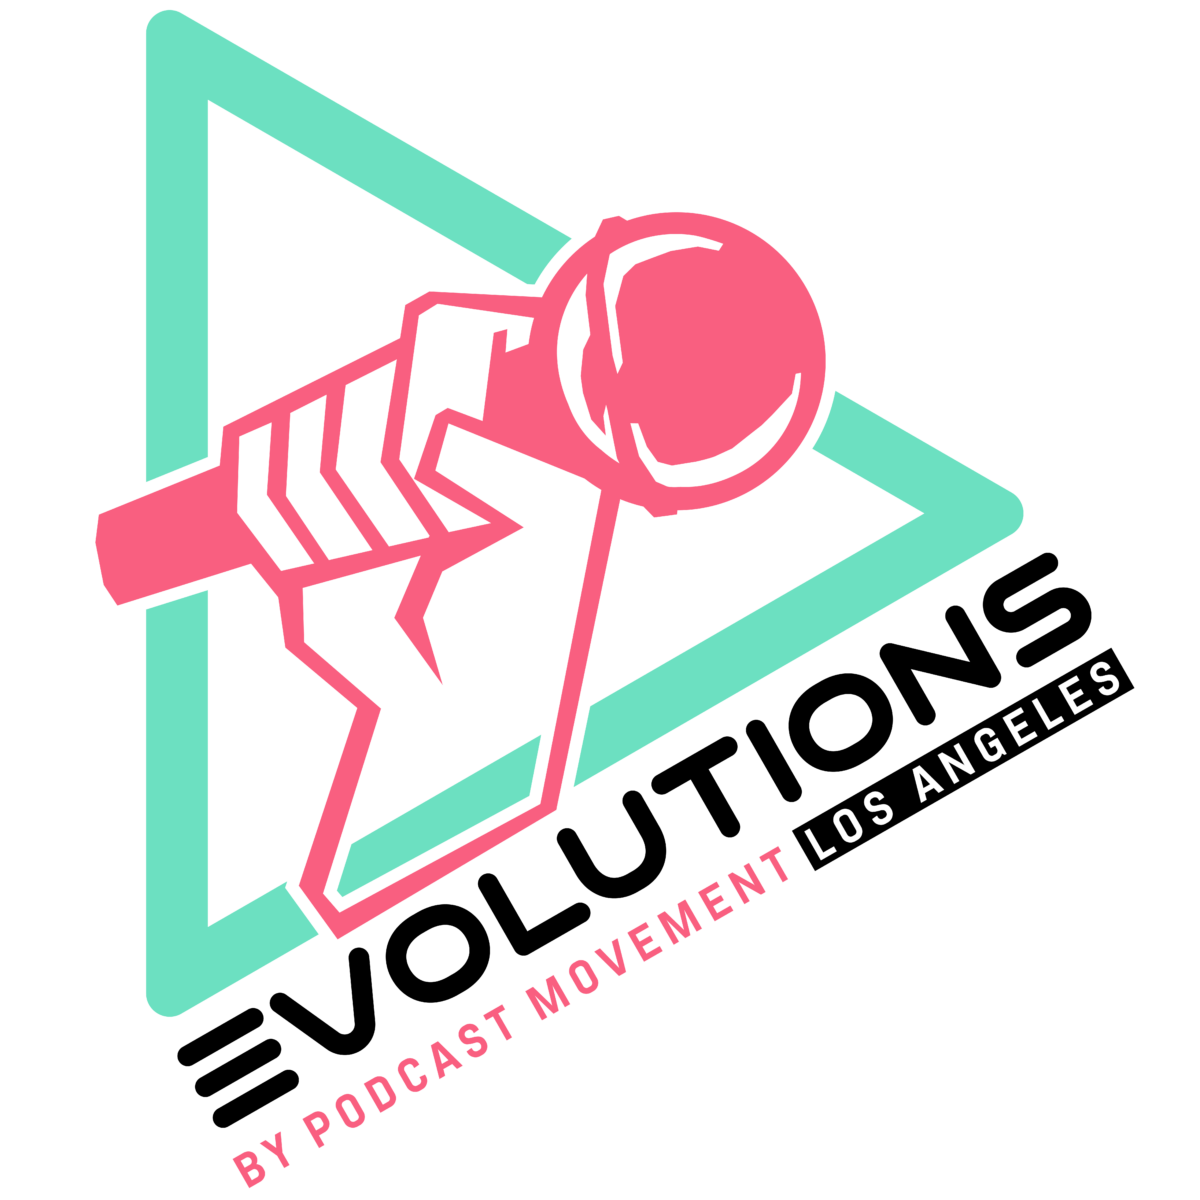 Events Podcast Movement Podcasting News, Resources, Conferences and